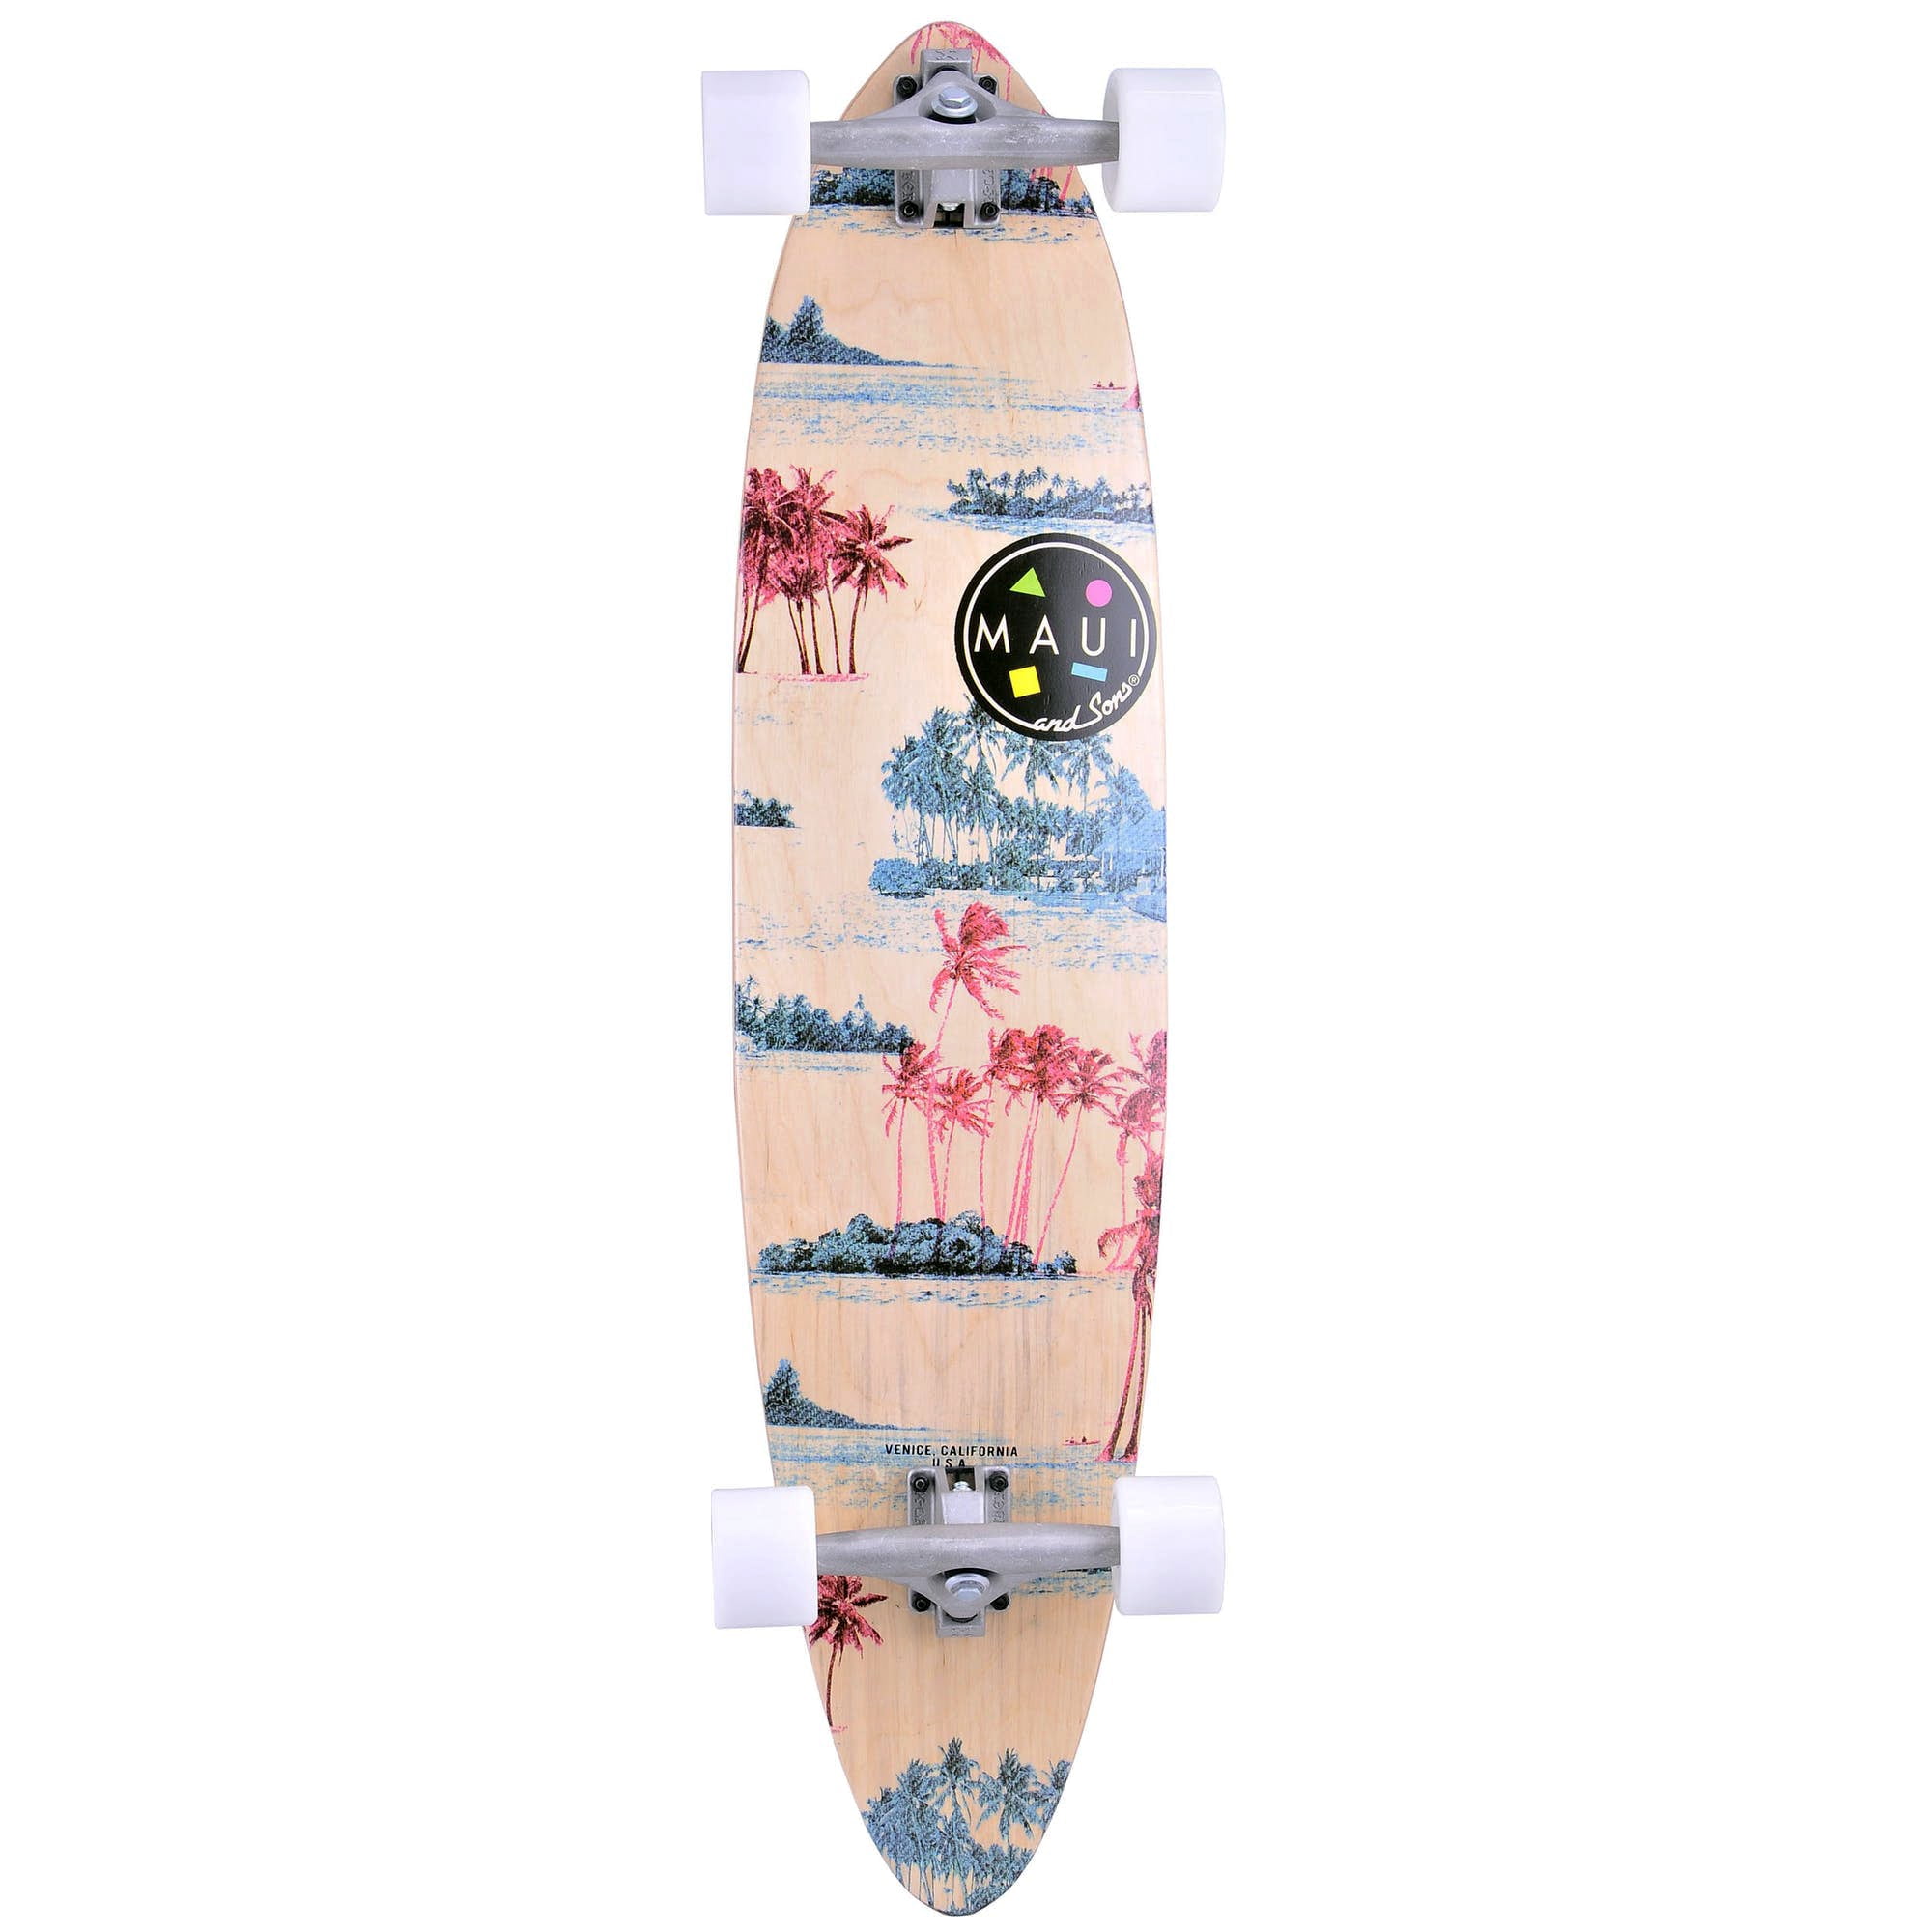 Decode Etablering Tomat Maui and Sons 39" Pintail Longboard Skateboard with Black Grip Tape -  Walmart.com